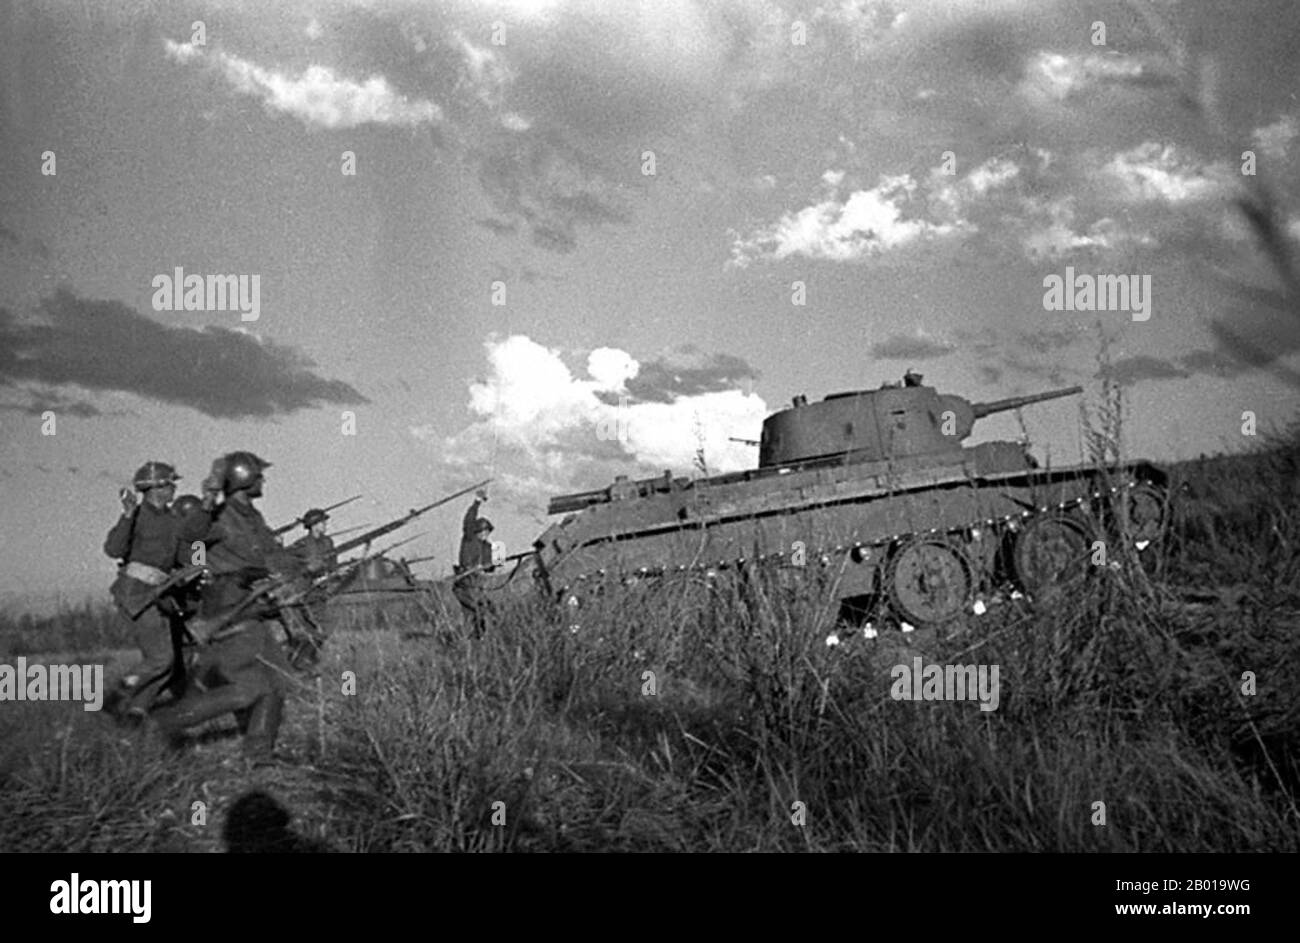 Mongolia: Soviet BT07 tanks and infantry attacking at Khalkhin Gol, 1939.  The Battles of Khalkhin Gol were the decisive engagements of the undeclared Soviet-Japanese Border War fought between the Soviet Union, Mongolia and Japan in 1939. They were named after the river Khalkhin Gol, which passes through the battlefield. In Japan, the decisive battle of the conflict is known as the Nomonhan Incident (Nomonhan Jiken) after a nearby village, and was a total defeat for their army. Stock Photo